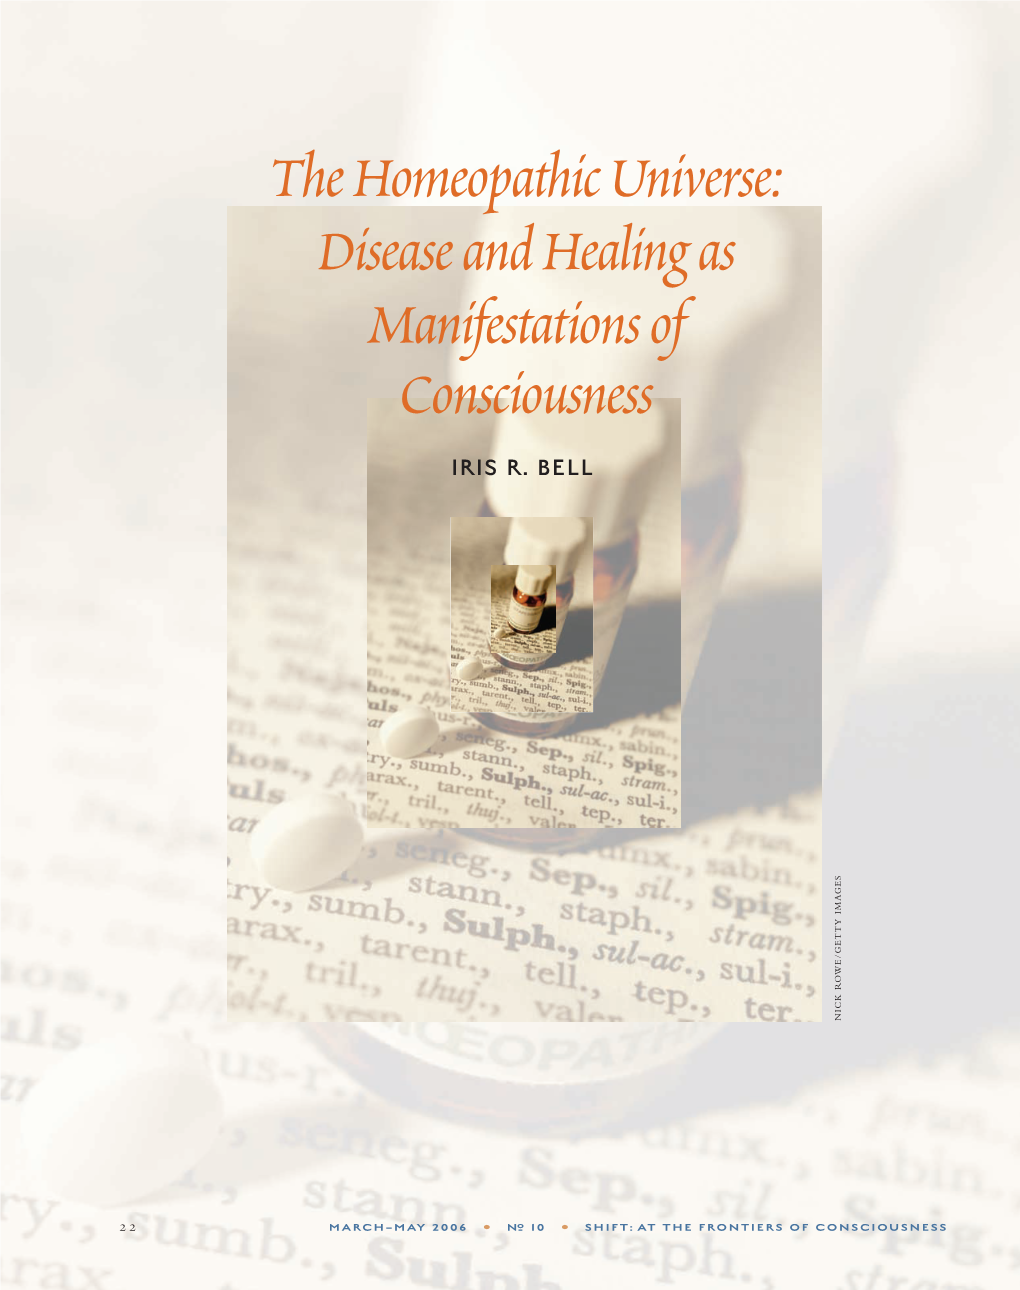 The Homeopathic Universe: Disease and Healing As Manifestations of Consciousness IRIS R